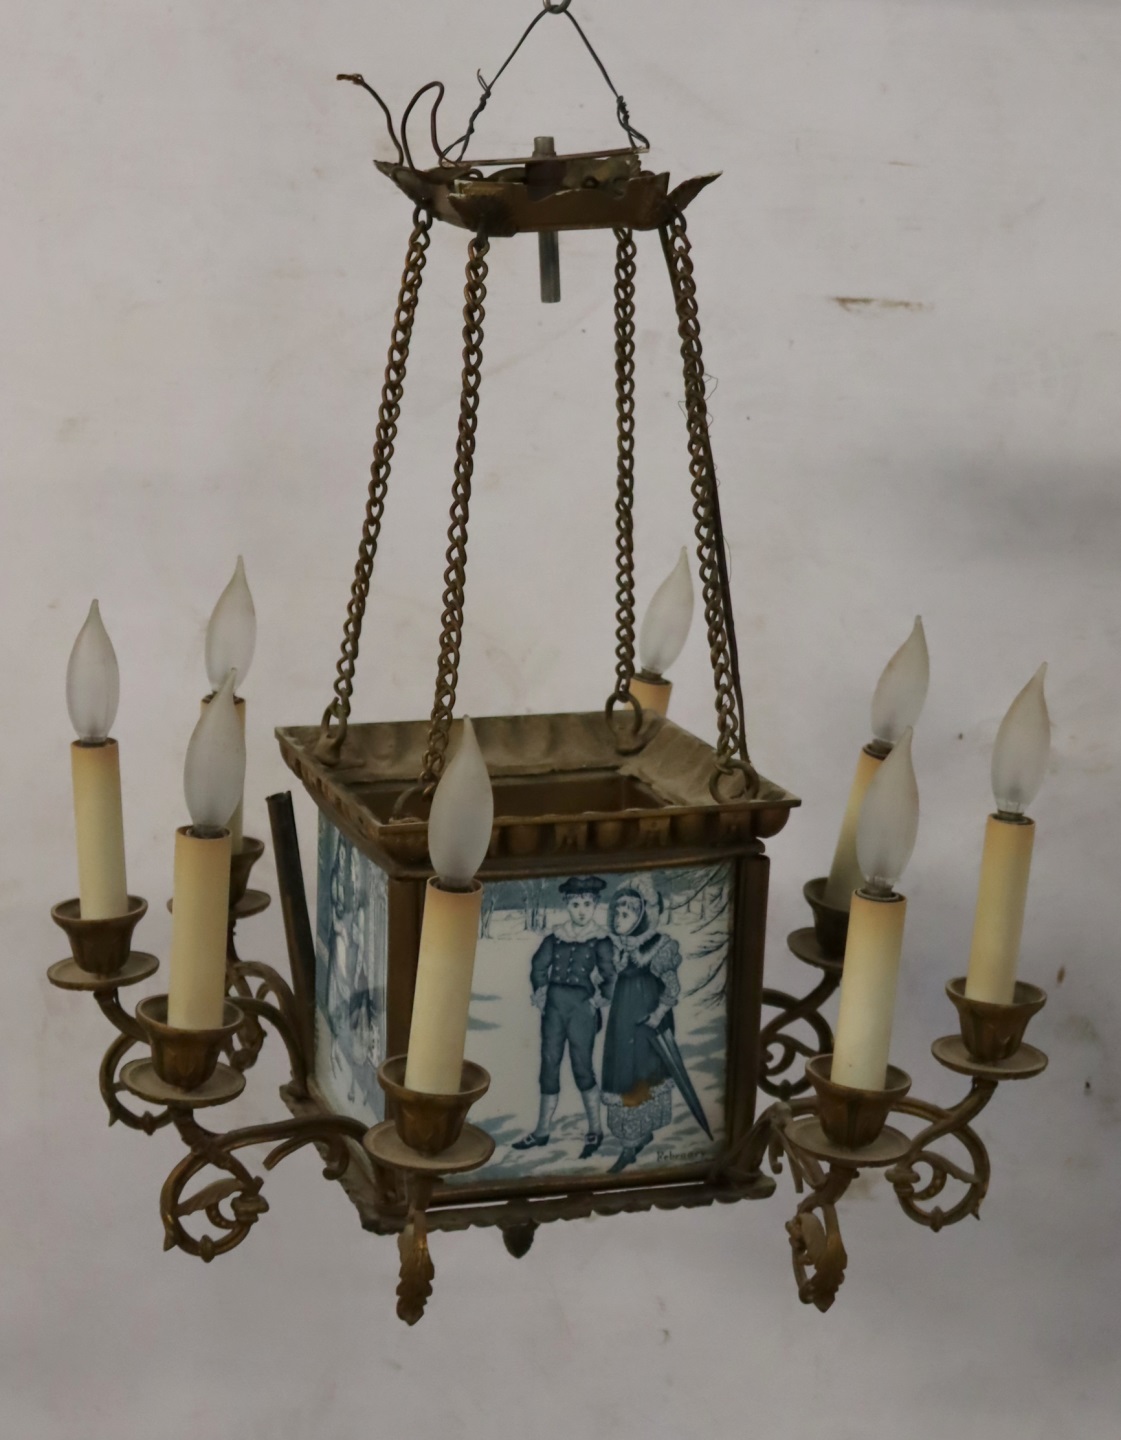 ANTIQUE GILT METAL CHANDELIER WITH 3bde16